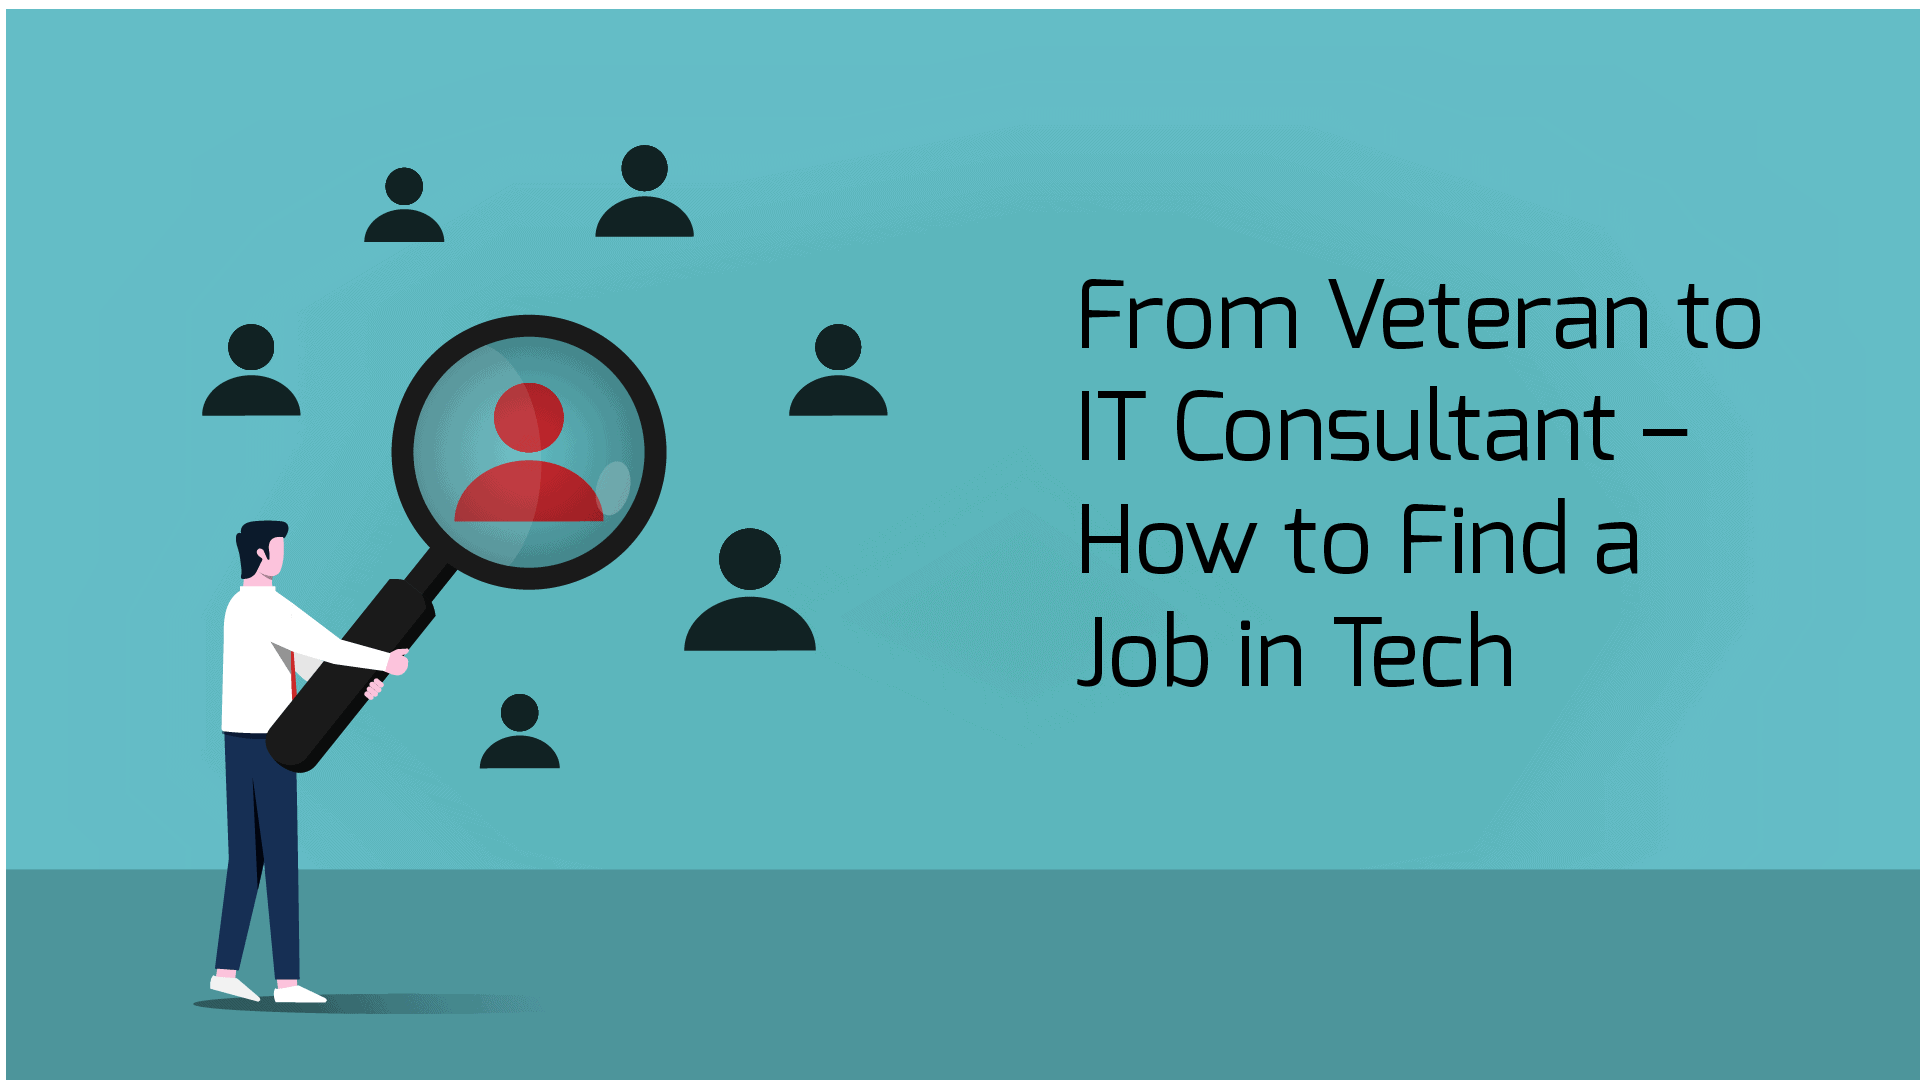 Guide for veterans transitioning to tech jobs